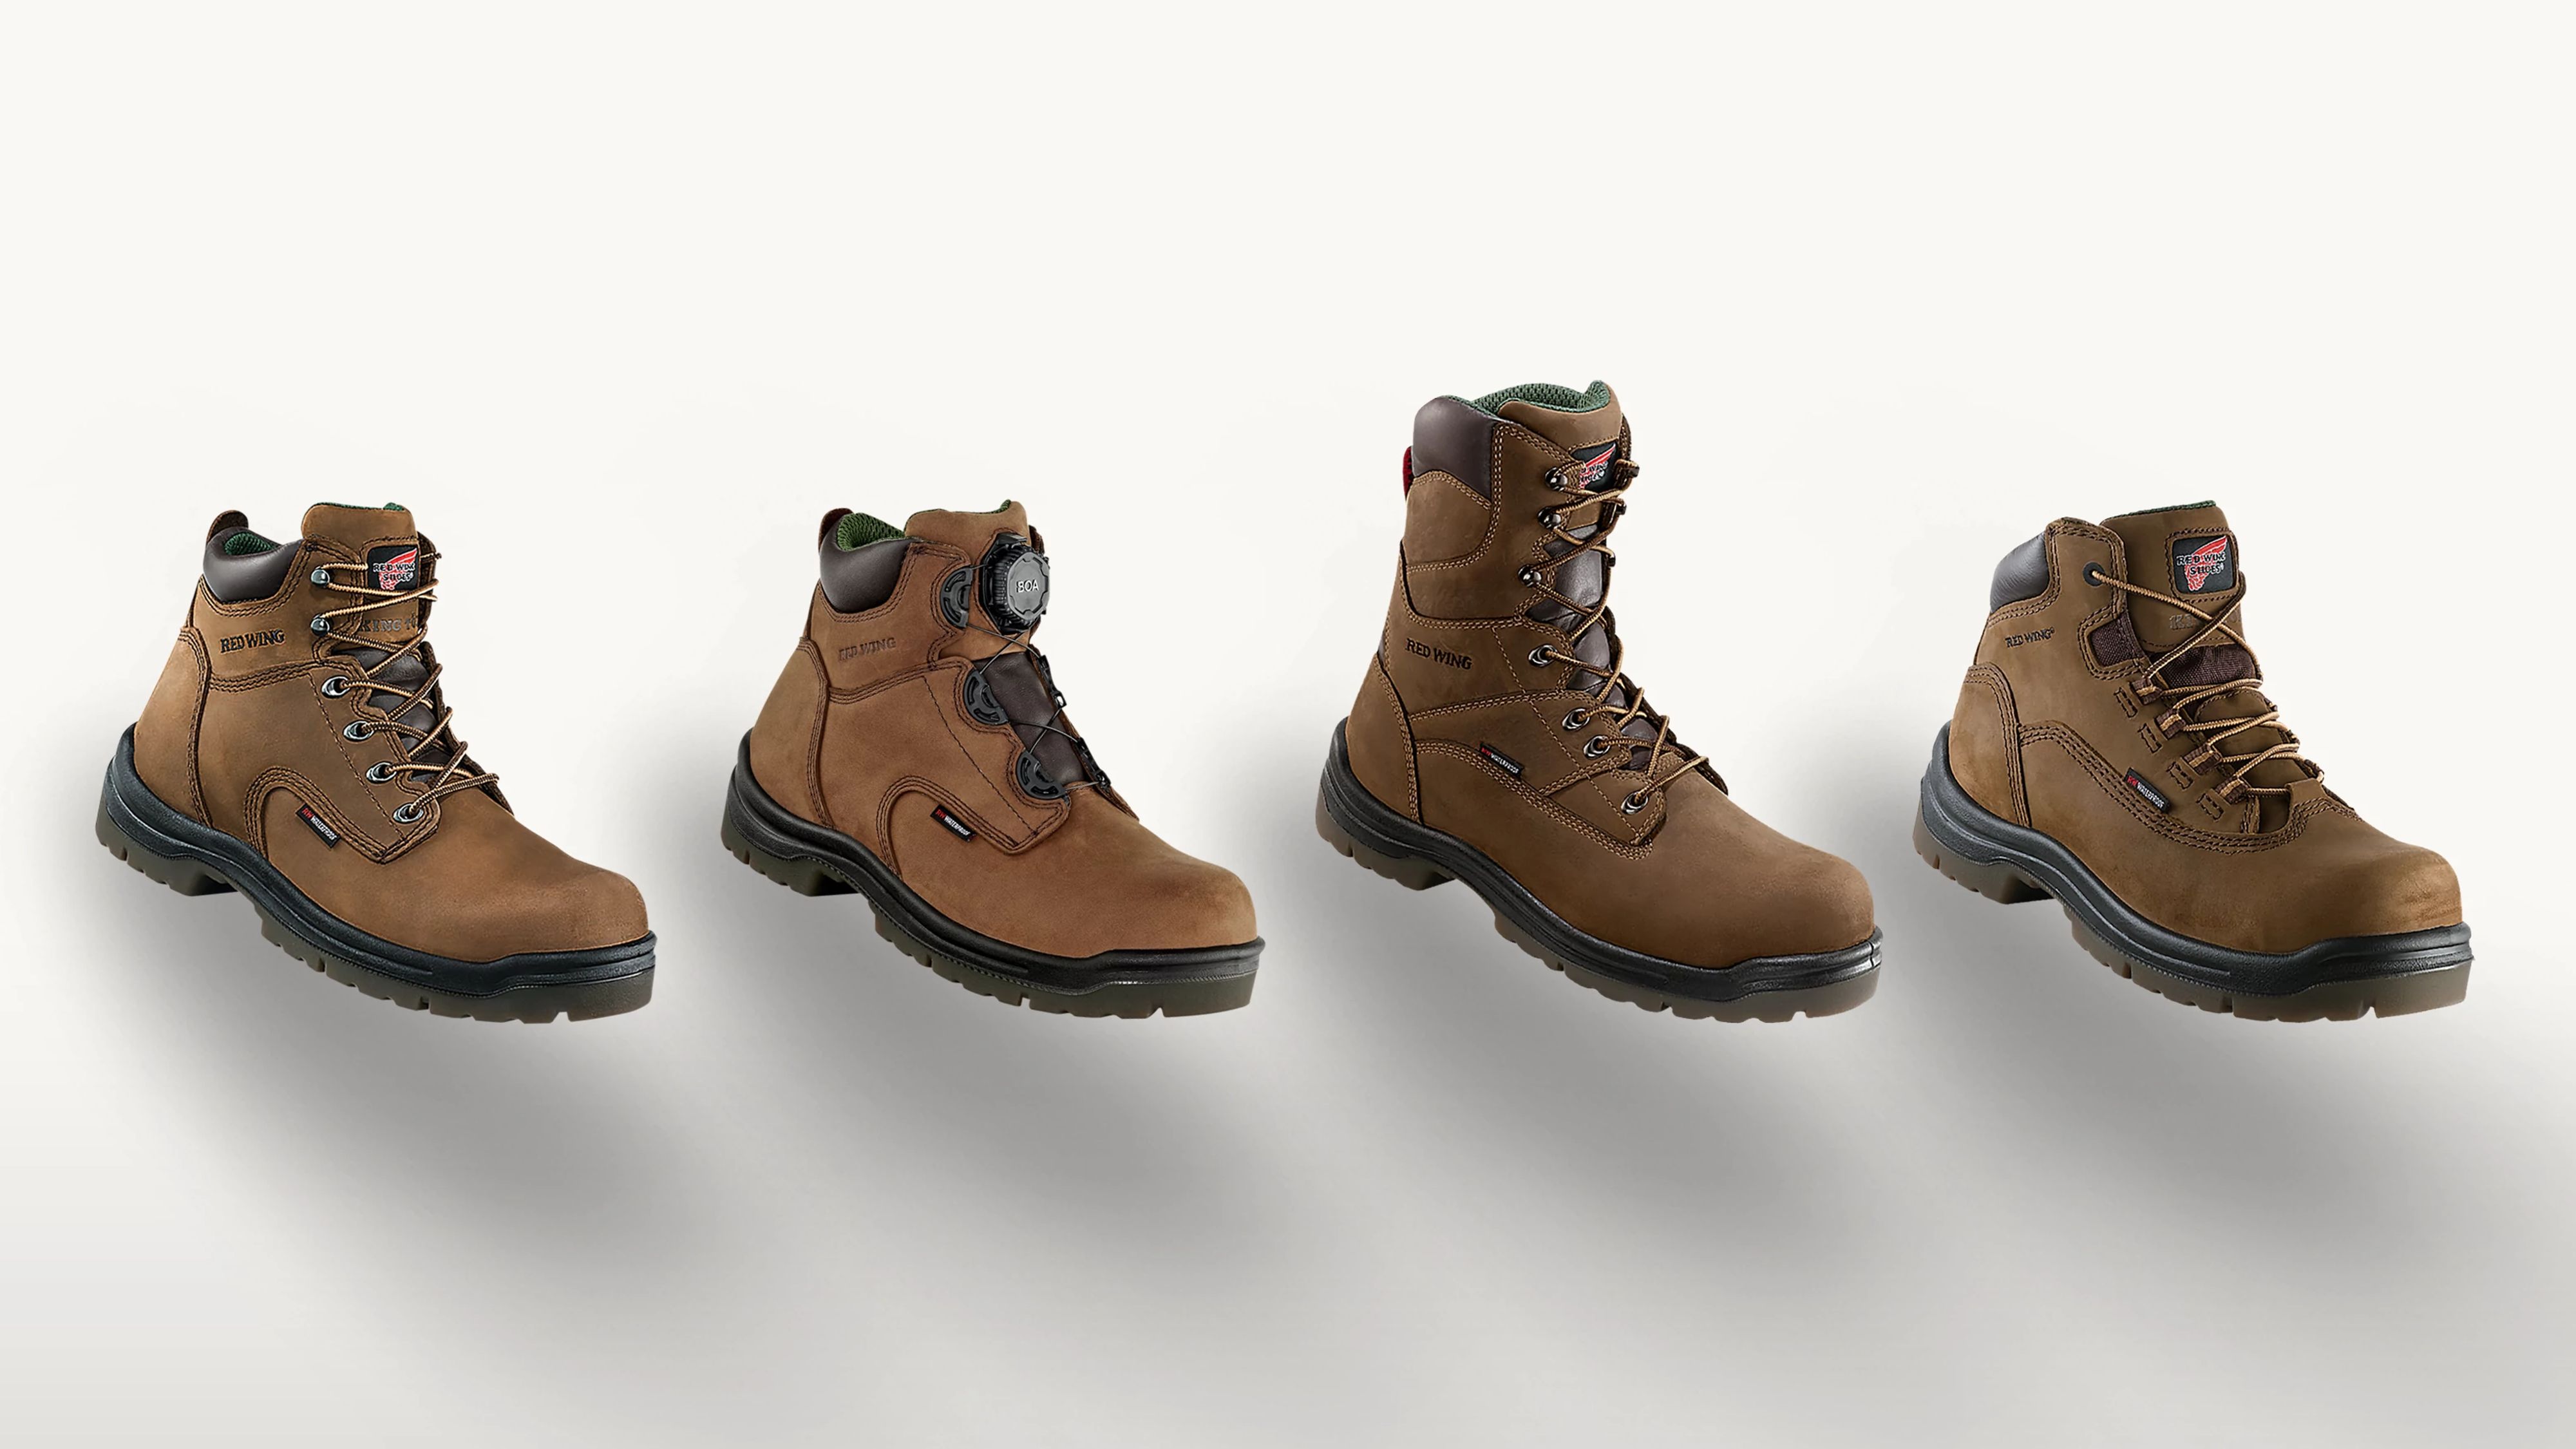 Four styles of Red Wing King Toe boots